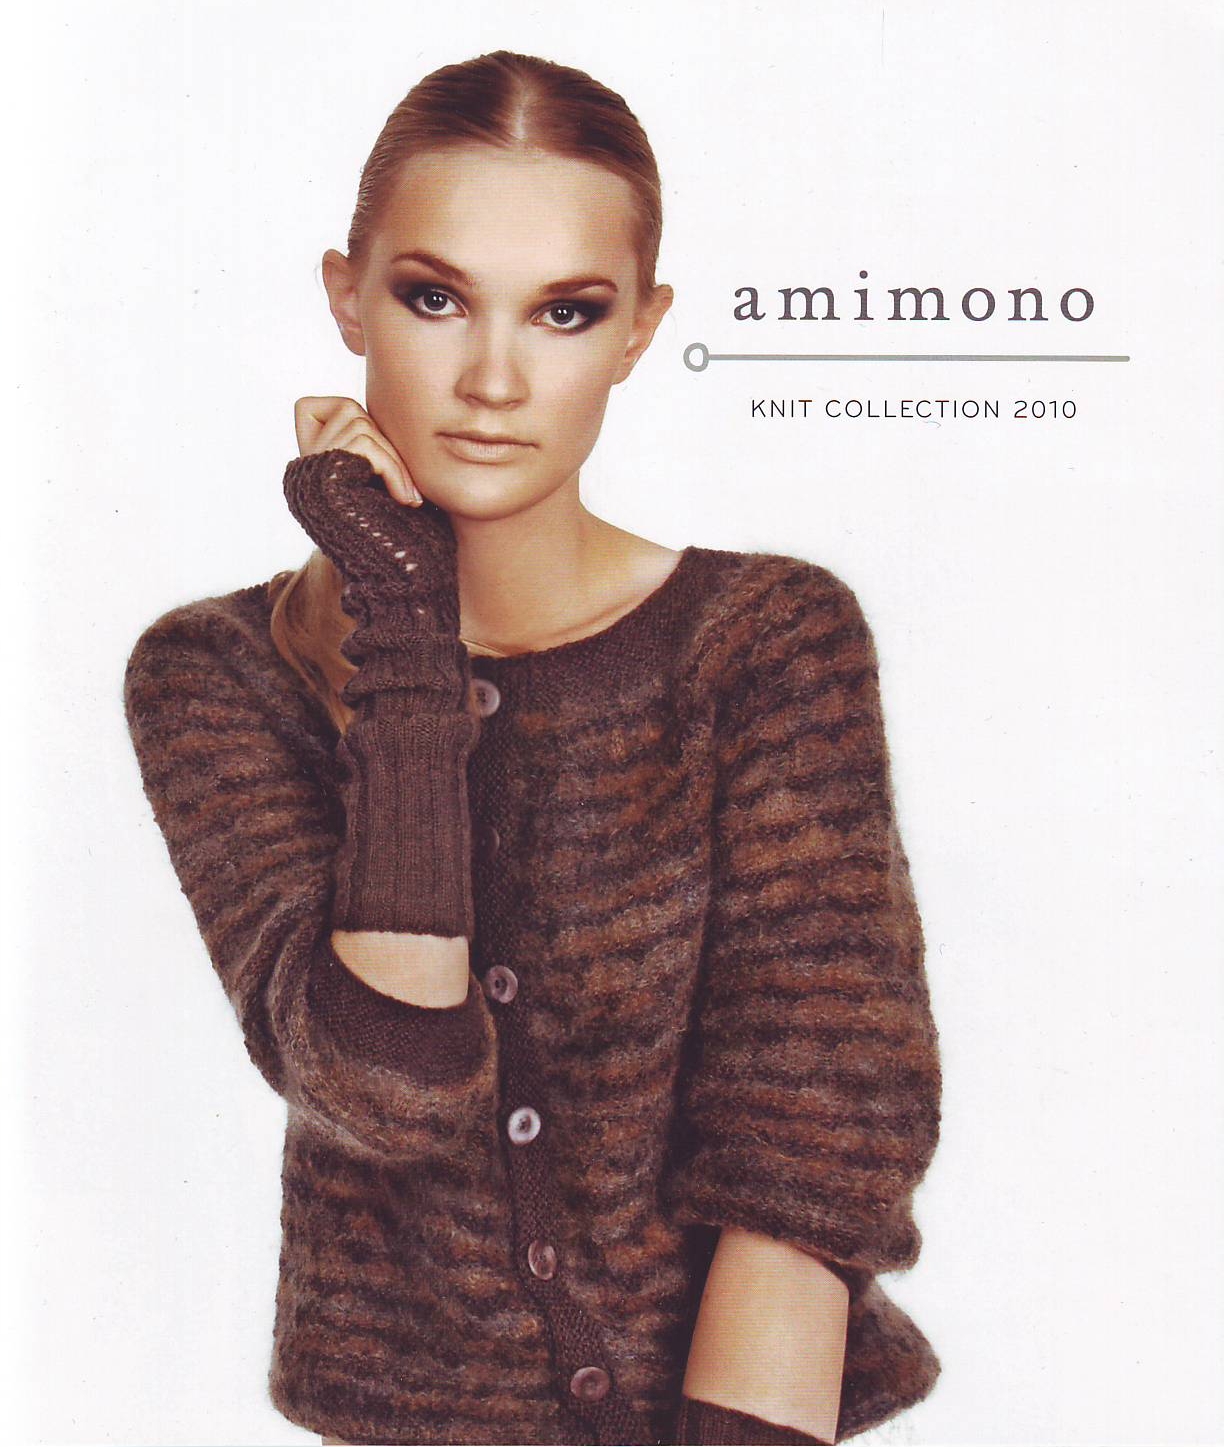 amimono knit collection 2010